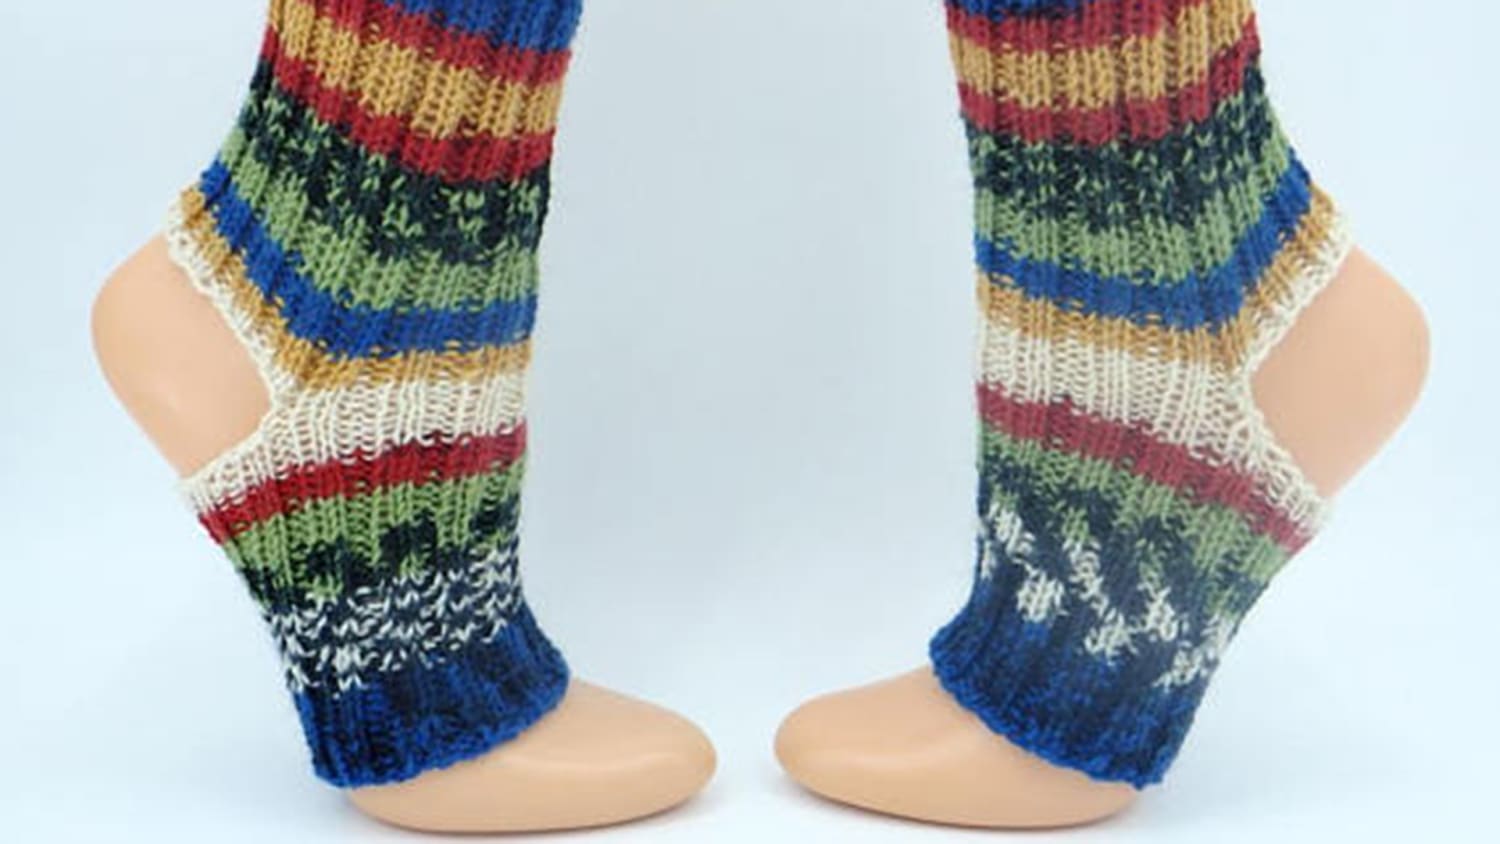 Flip-flop socks' are a thing — and 